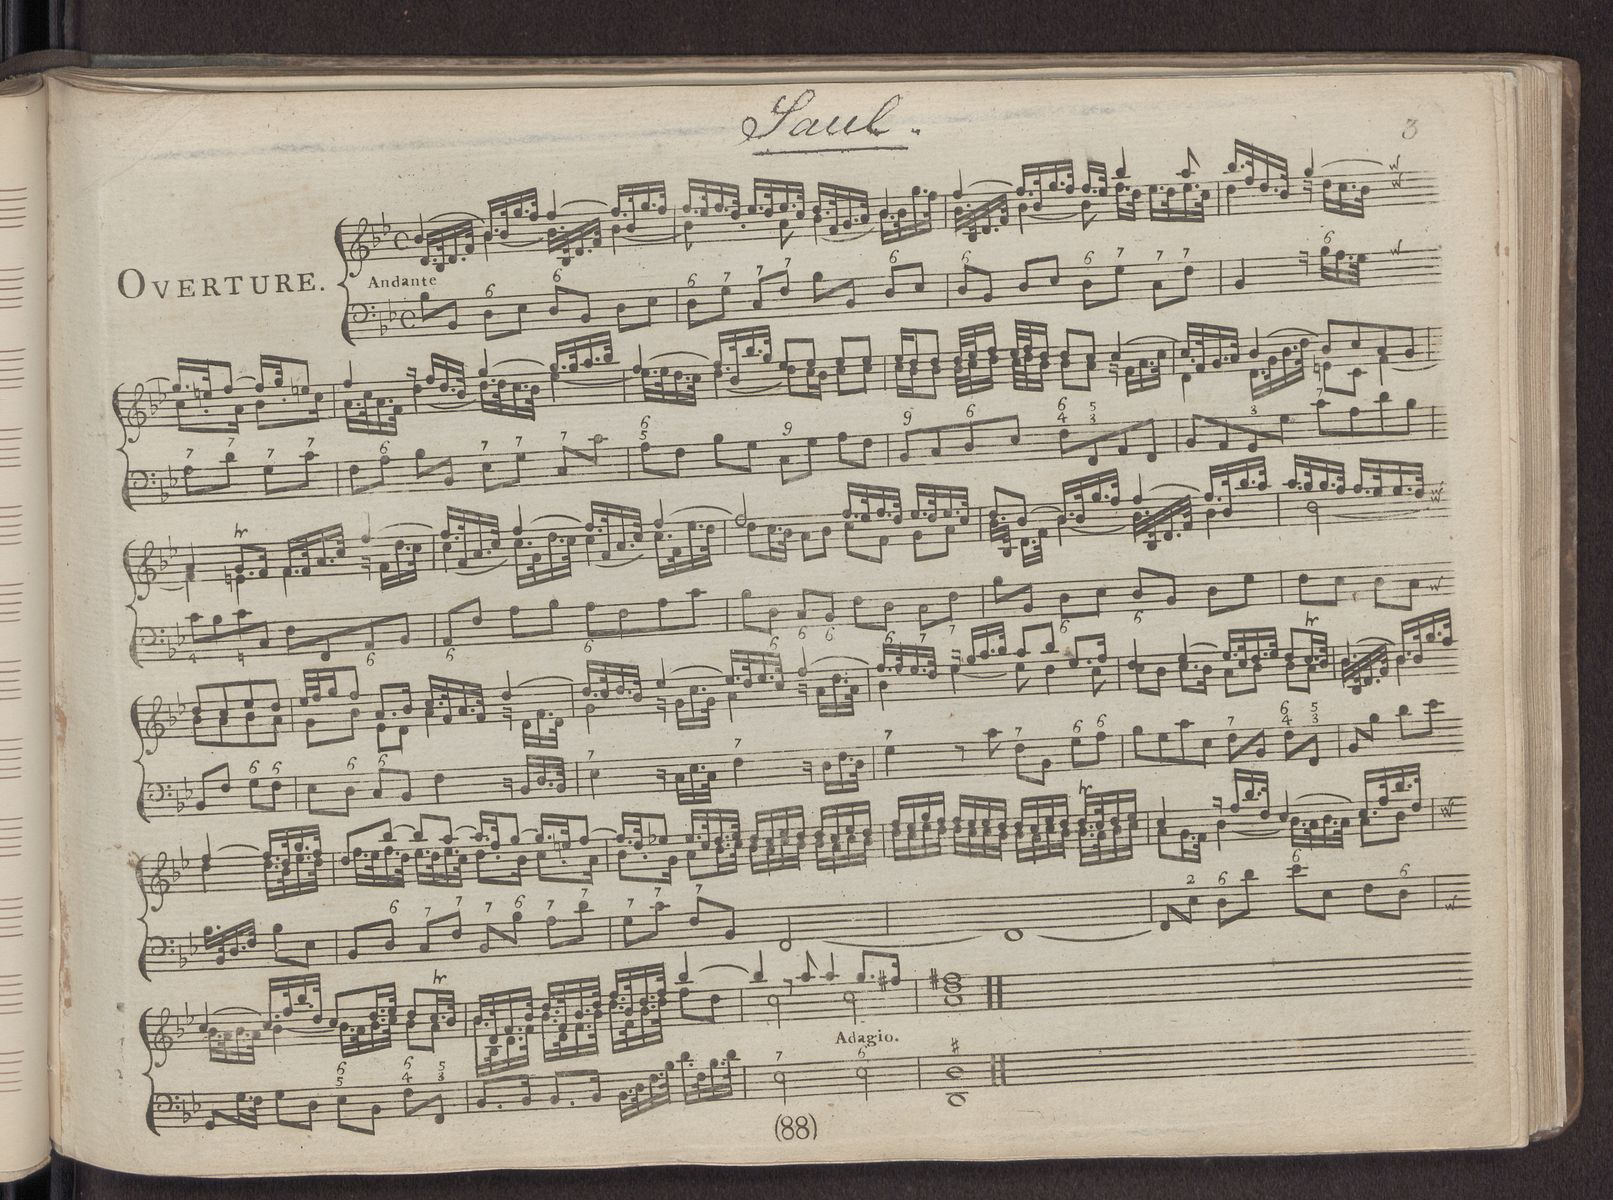 Saul; an oratorio : for the voice, harpsichord, and violin ; with the chorusses in score. ; [Fragment], Abbildung 3 (Stiftung Händel-Haus Halle CC BY-NC-SA)